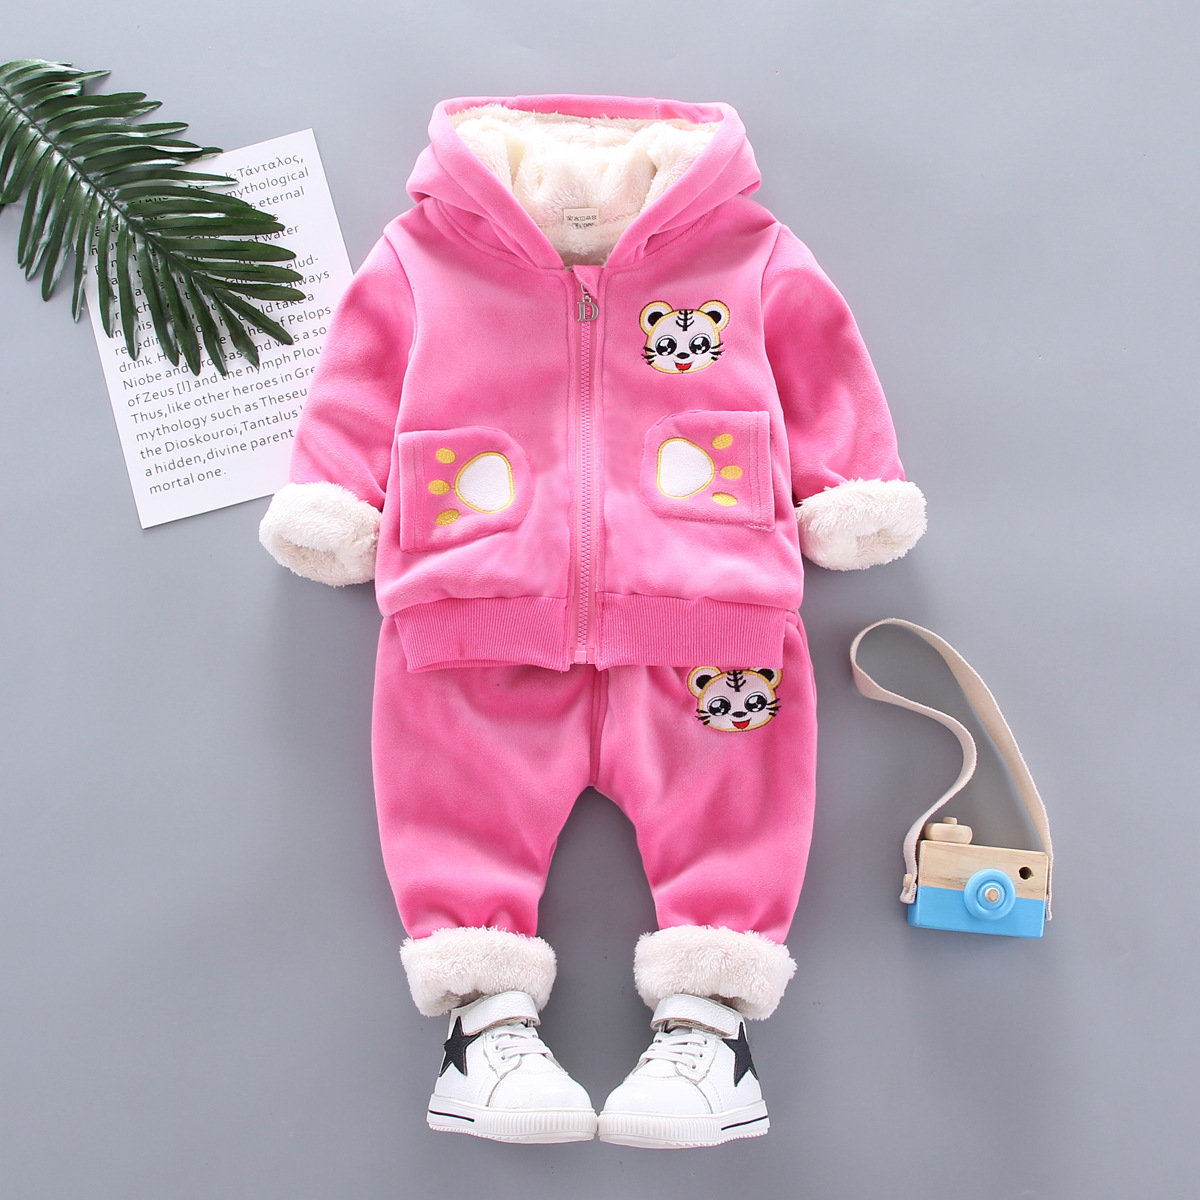 The New Children's clothing sports suit 12